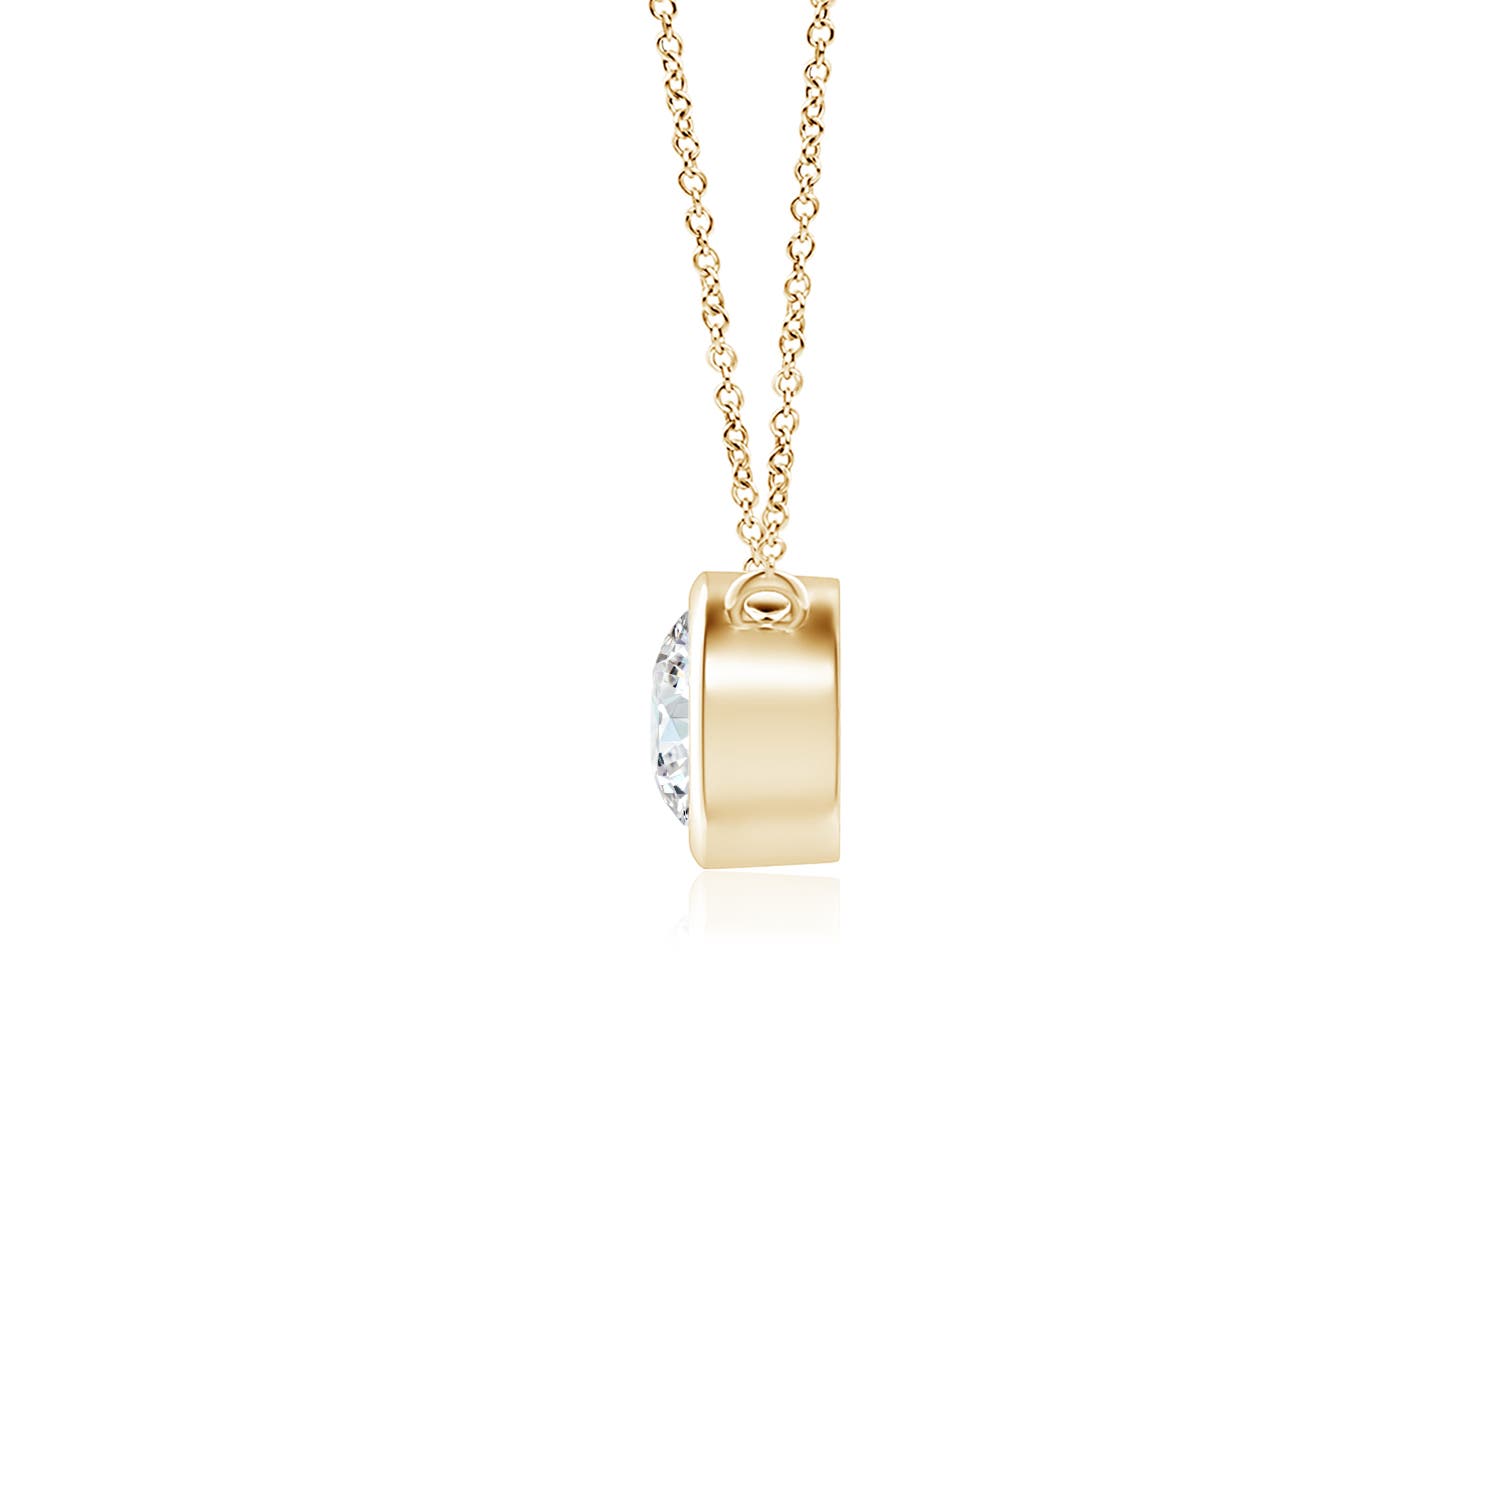 GVS2 / 0.11 CT / 14 KT Yellow Gold